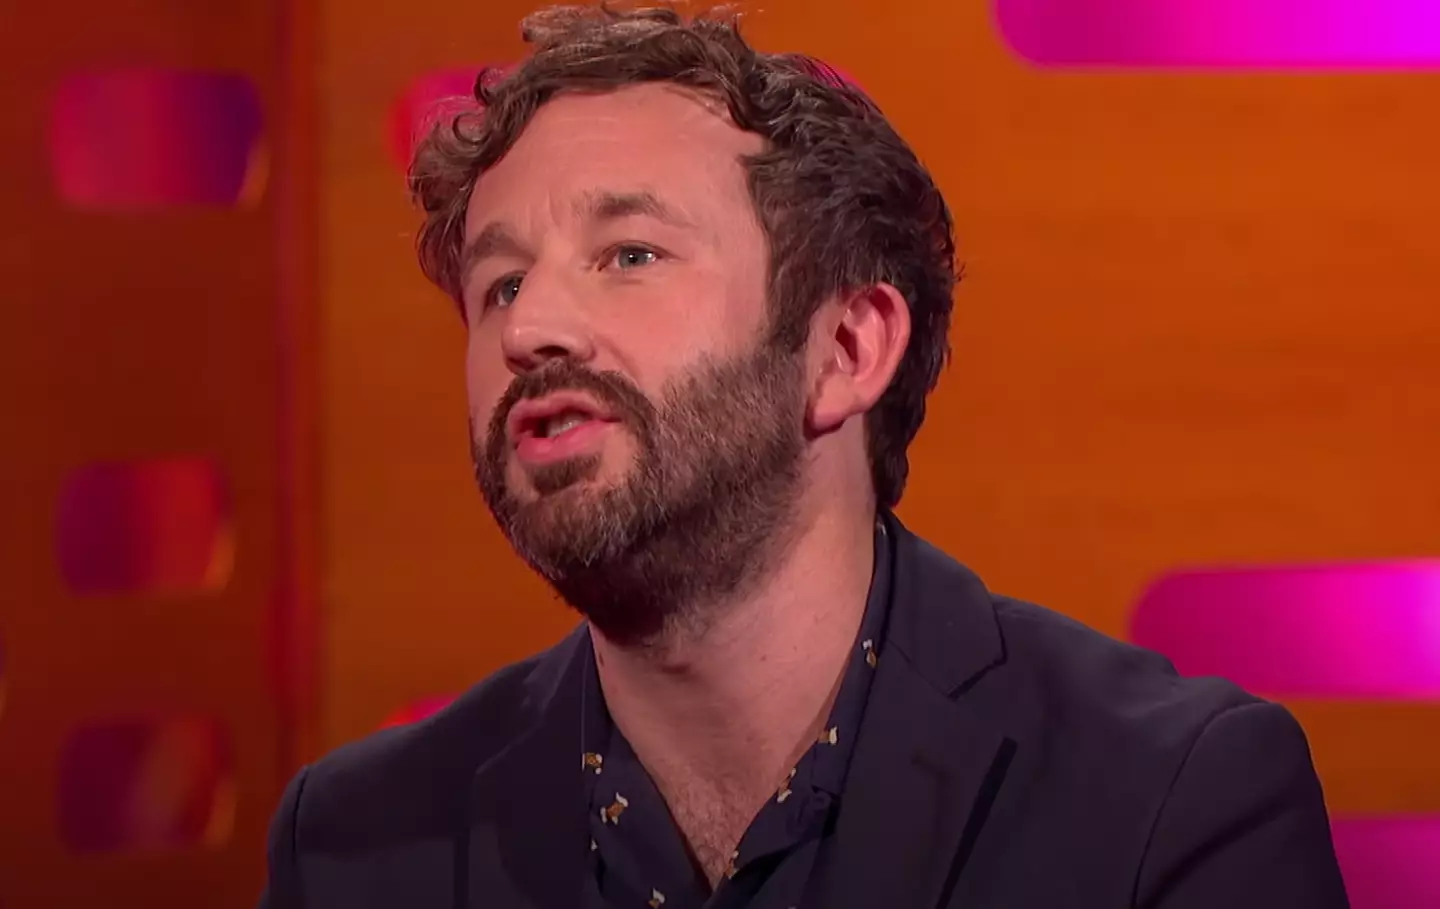 Chris O'Dowd was asked about the sketch recently by Metro.